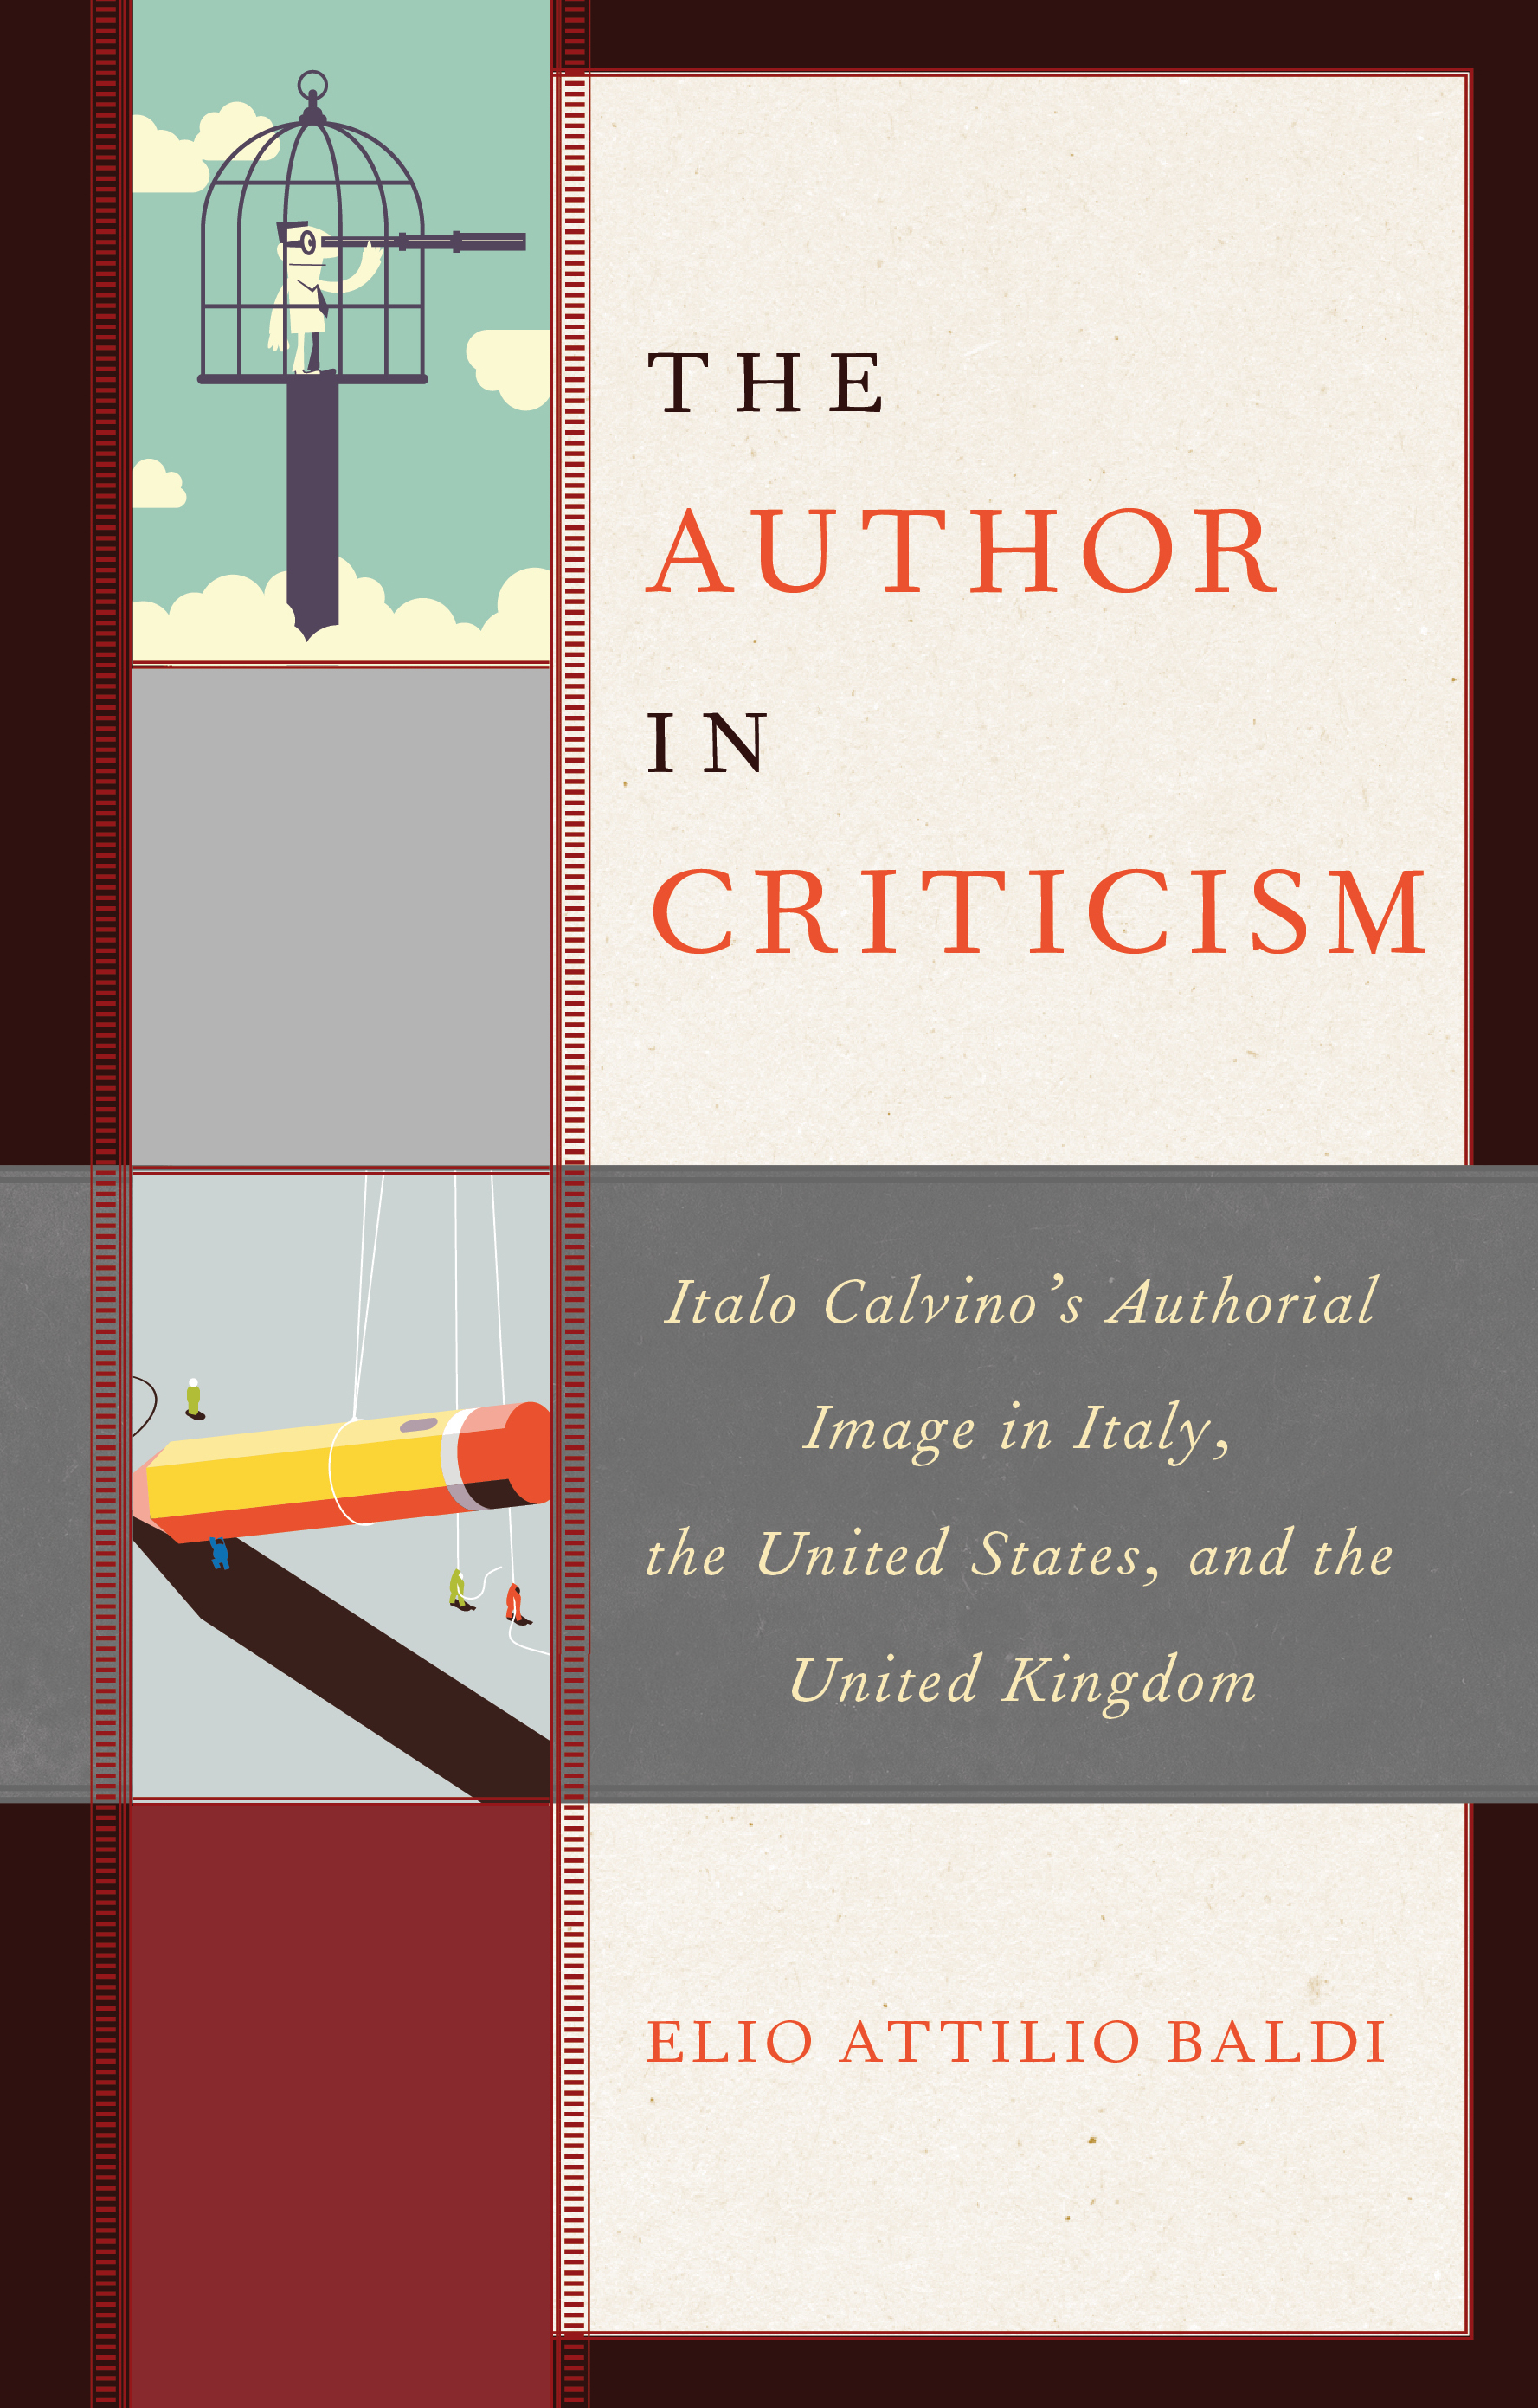 The Author in Criticism: Italo Calvino’s Authorial Image in Italy, the United States, and the United Kingdom